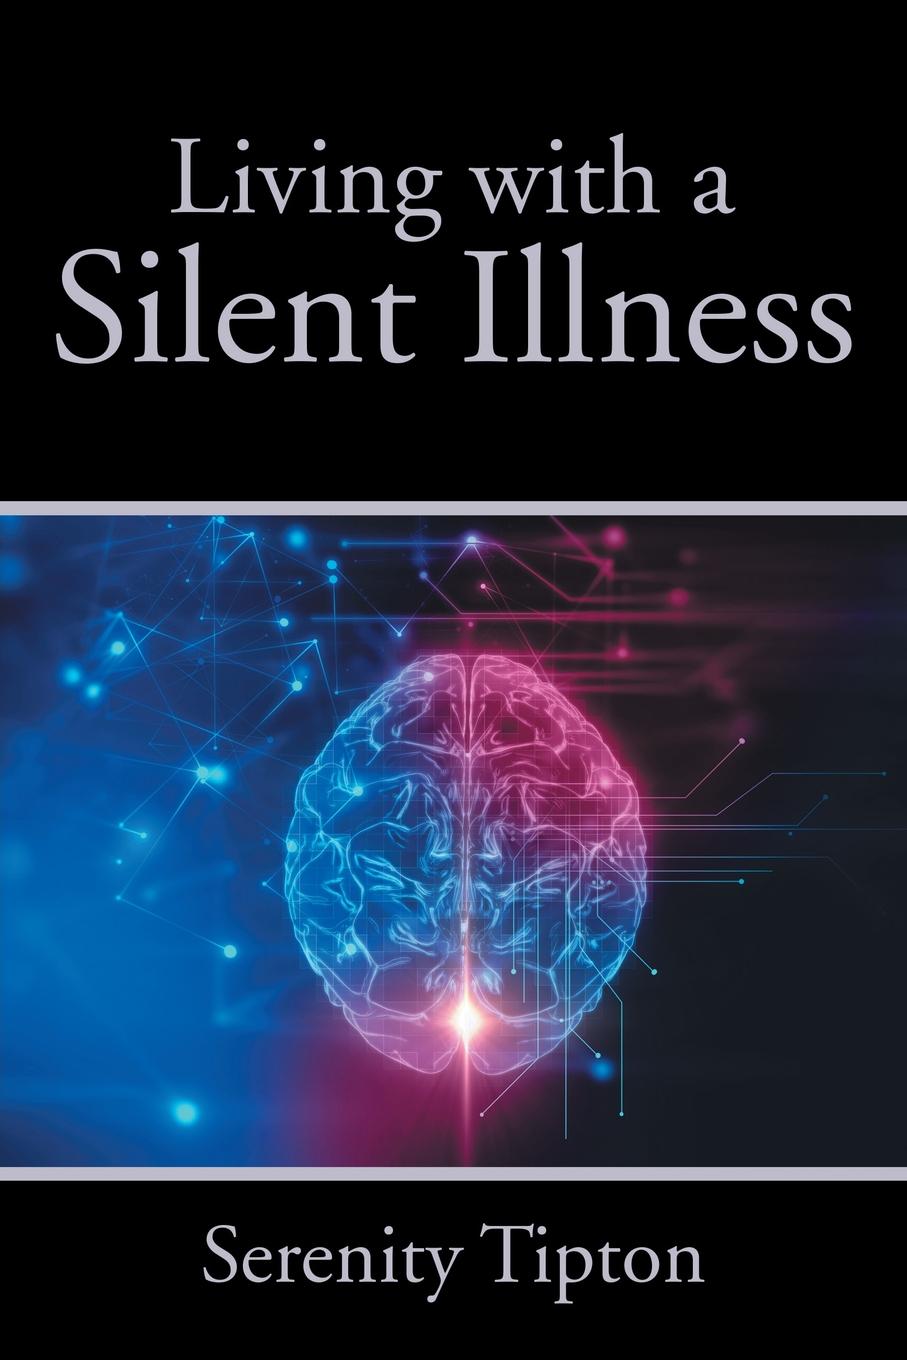 Living with a Silent Illness